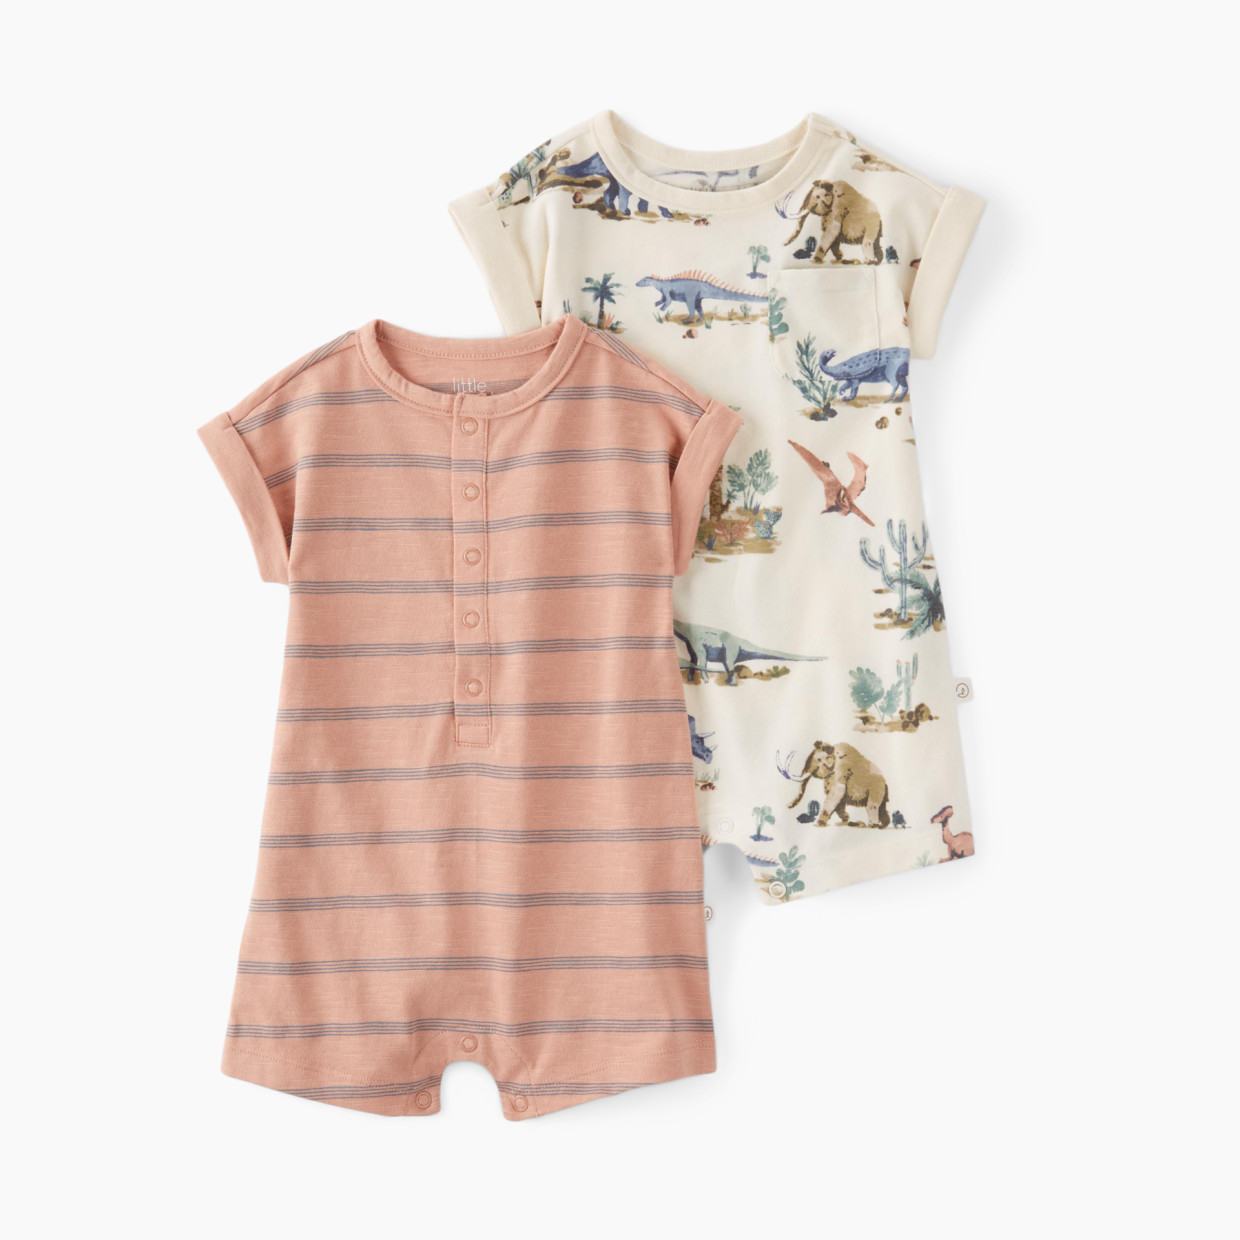 Carter's Little Planet 2-Pack Organic Cotton Rompers - Multi-Color, 3 M.